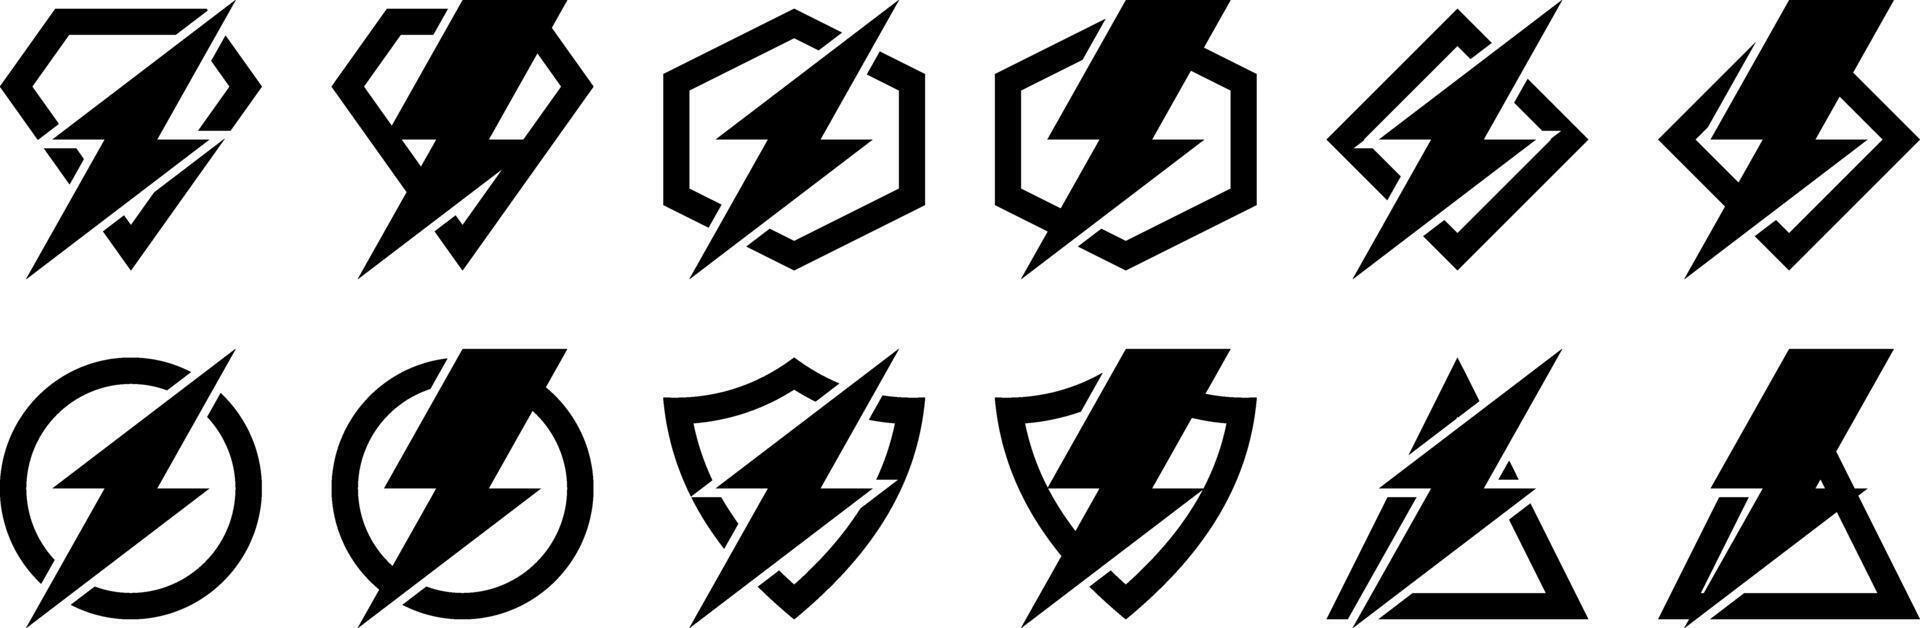 Lightning flash vector icon set. Electric power energy symbol. simple and modern design for logo, app, web, poster.